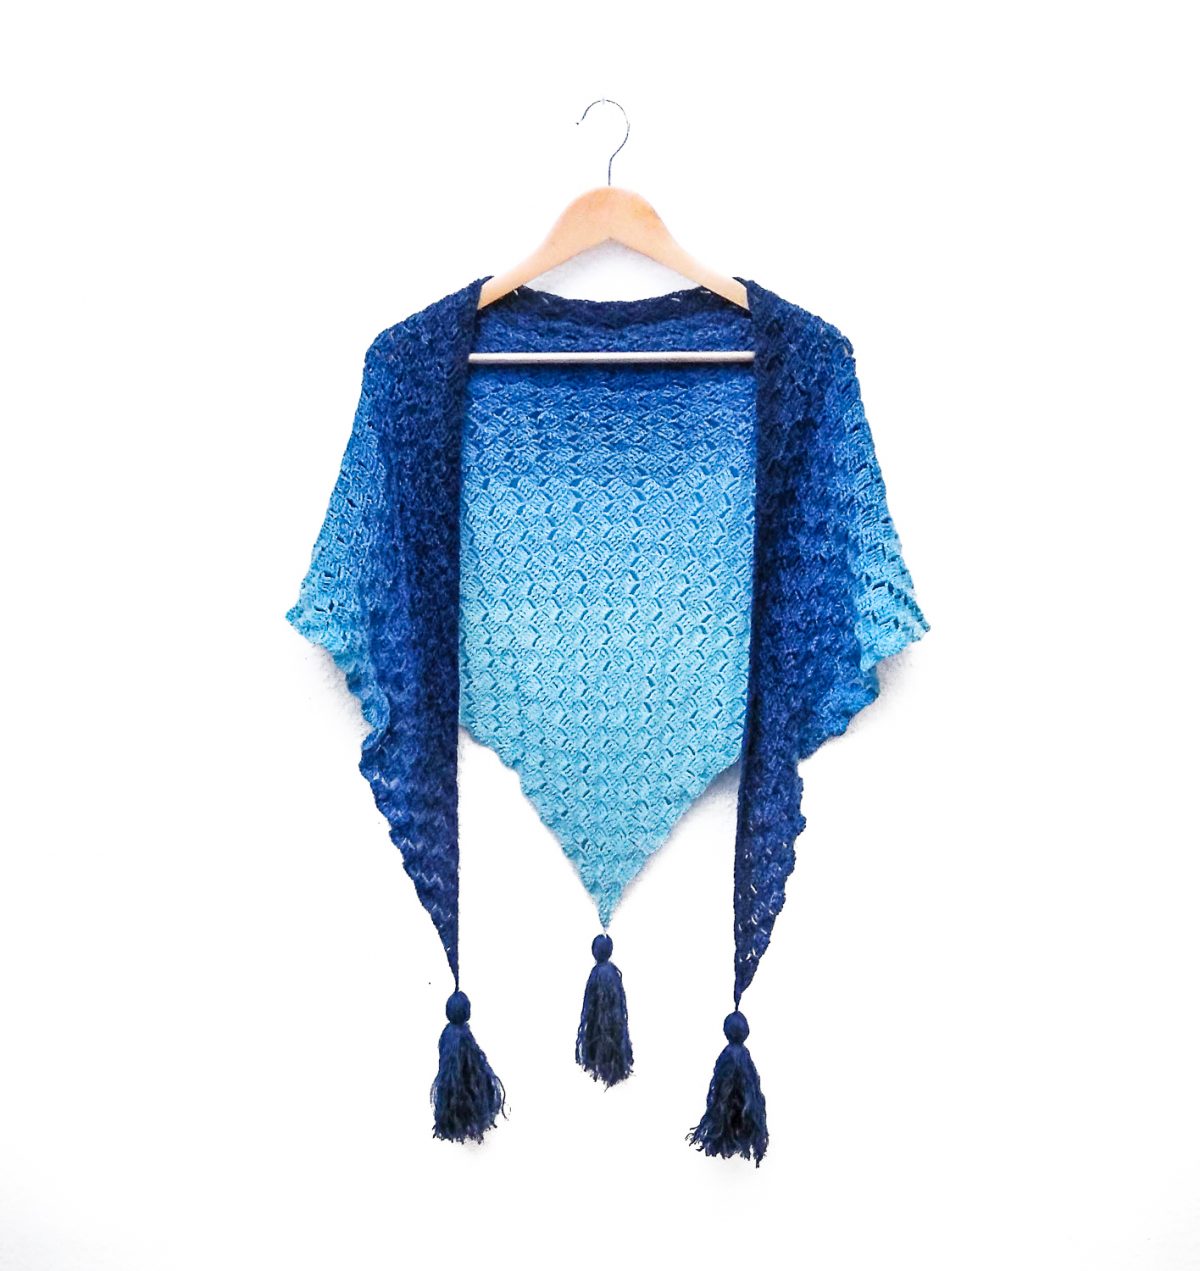 Blue gradient shawl draped over a clothes hanger